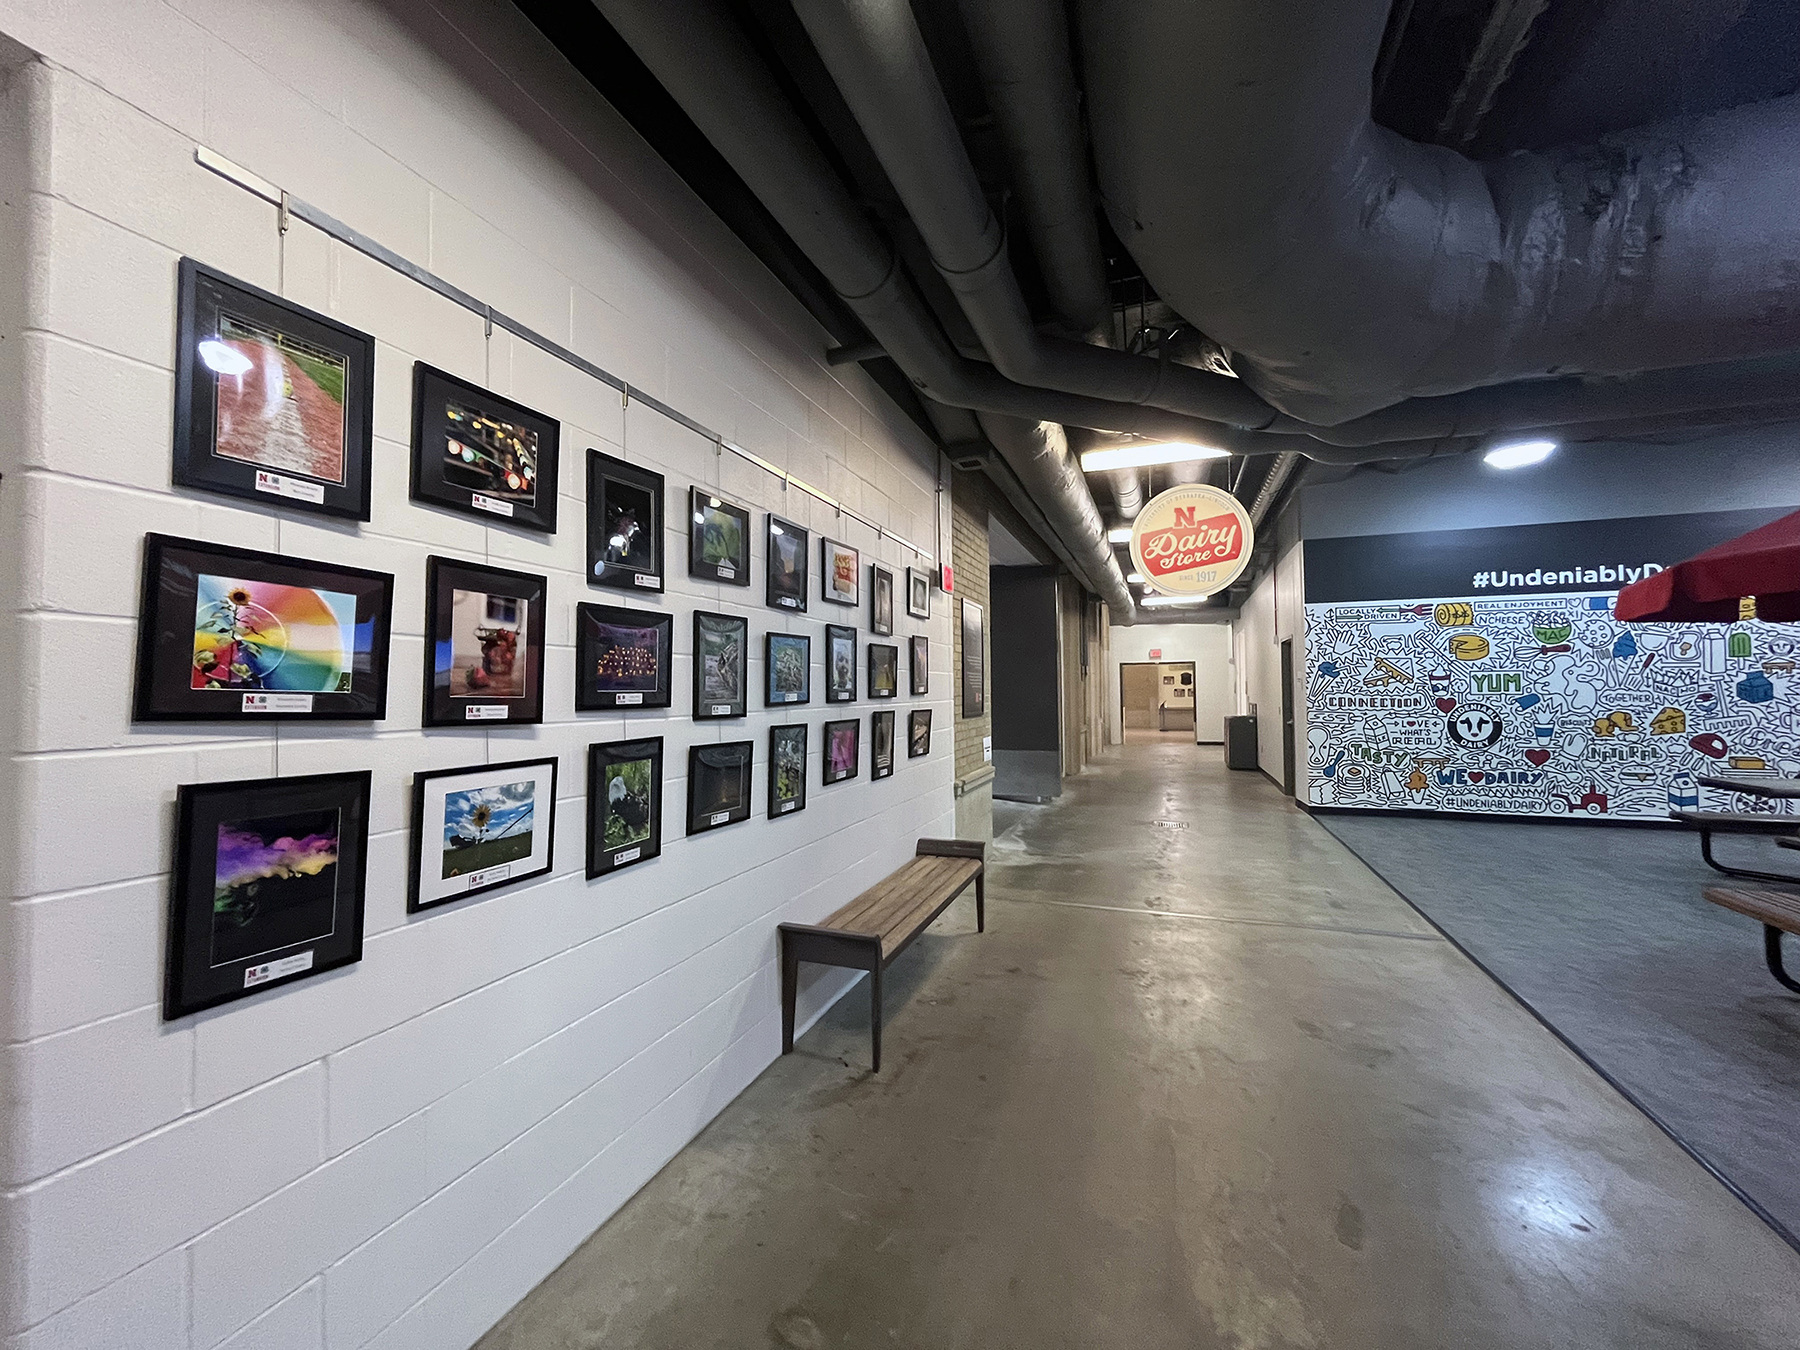 The Nebraska East Campus Visitors Center is featuring a new collection of photography captured by 4-H members from across the state.